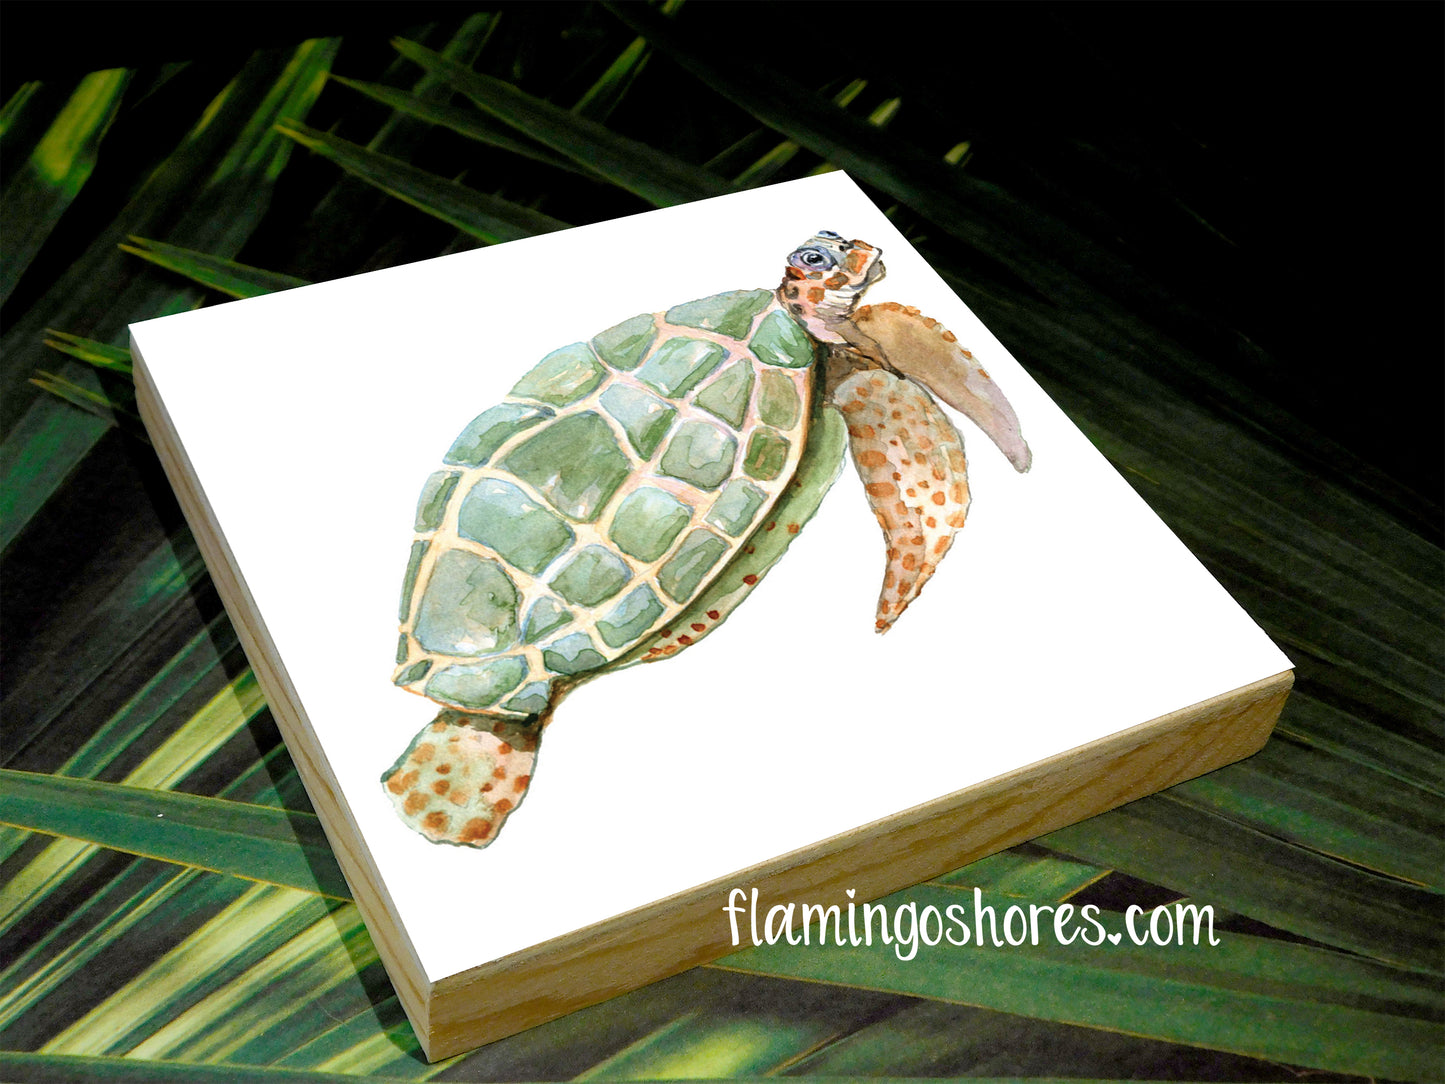 Green Turtle Watercolor Print on Wood Block - Flamingo Shores - Original Art for Home Decor and Gifts